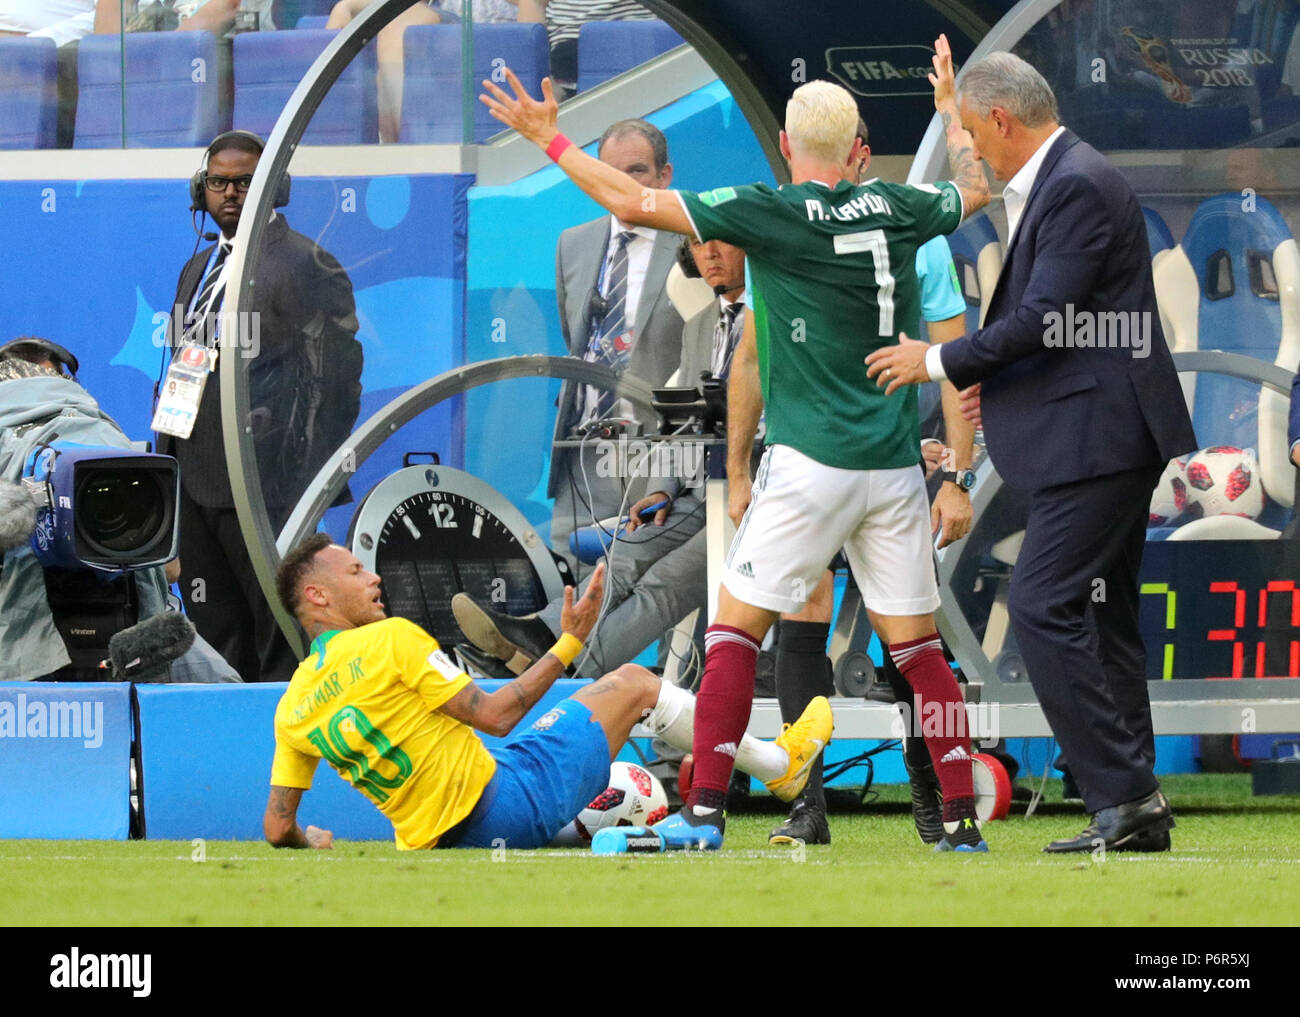 Samara, Russia. 02nd July, 2018. Soccer, World Cup 2018, Final round - round of 16: Mexico vs. Brazil at the Samara stadium: Brazil's Neymar (L) lying on the floor after a duel while Mexico's Miguel Layun and Brazil head coach Tite (R) argue. Credit: Christian Charisius/dpa/Alamy Live News Stock Photo